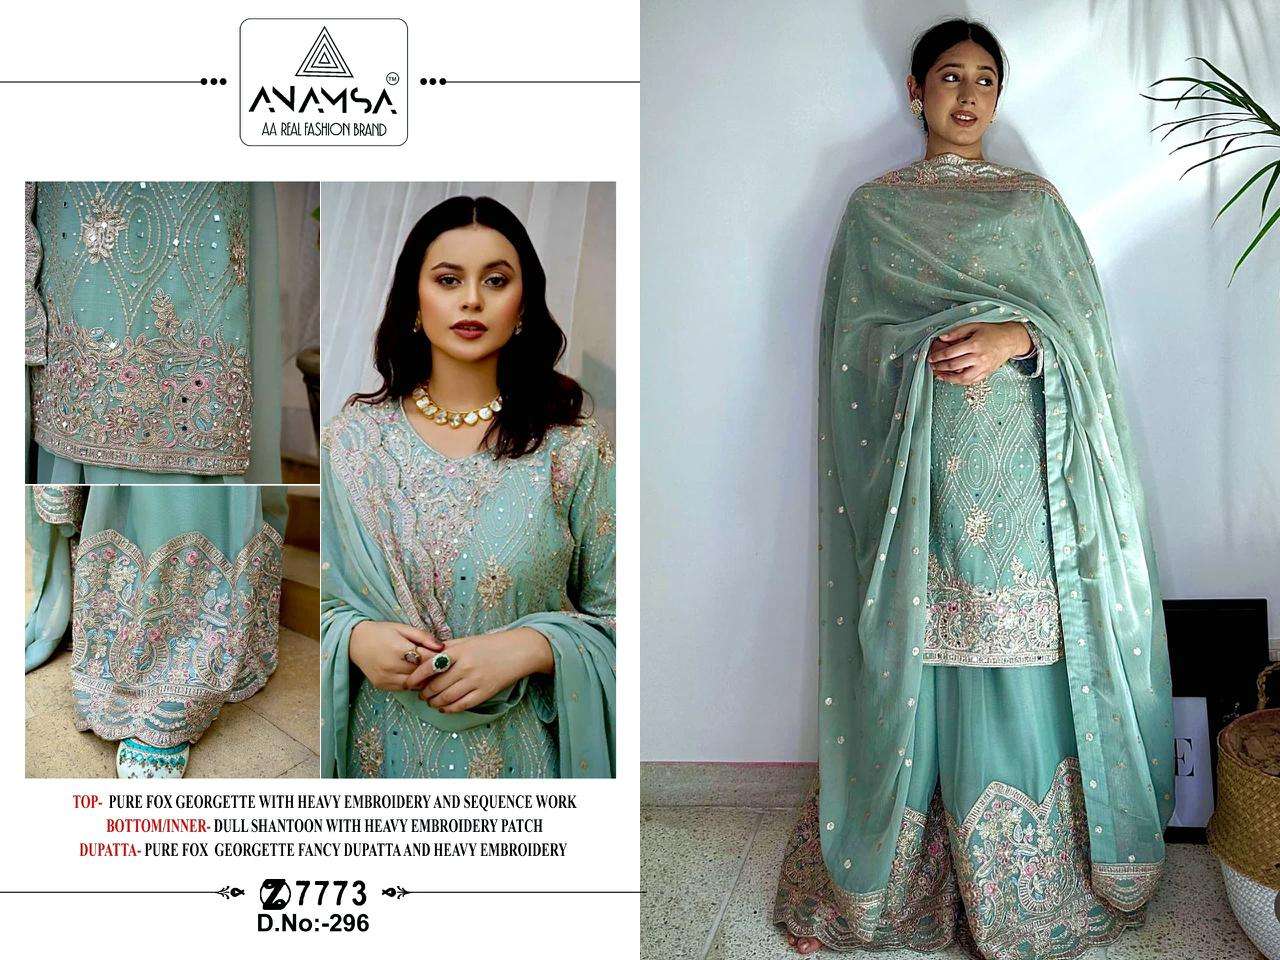 Anamsa 296 georgette with embroidery work sky blue shades pa...